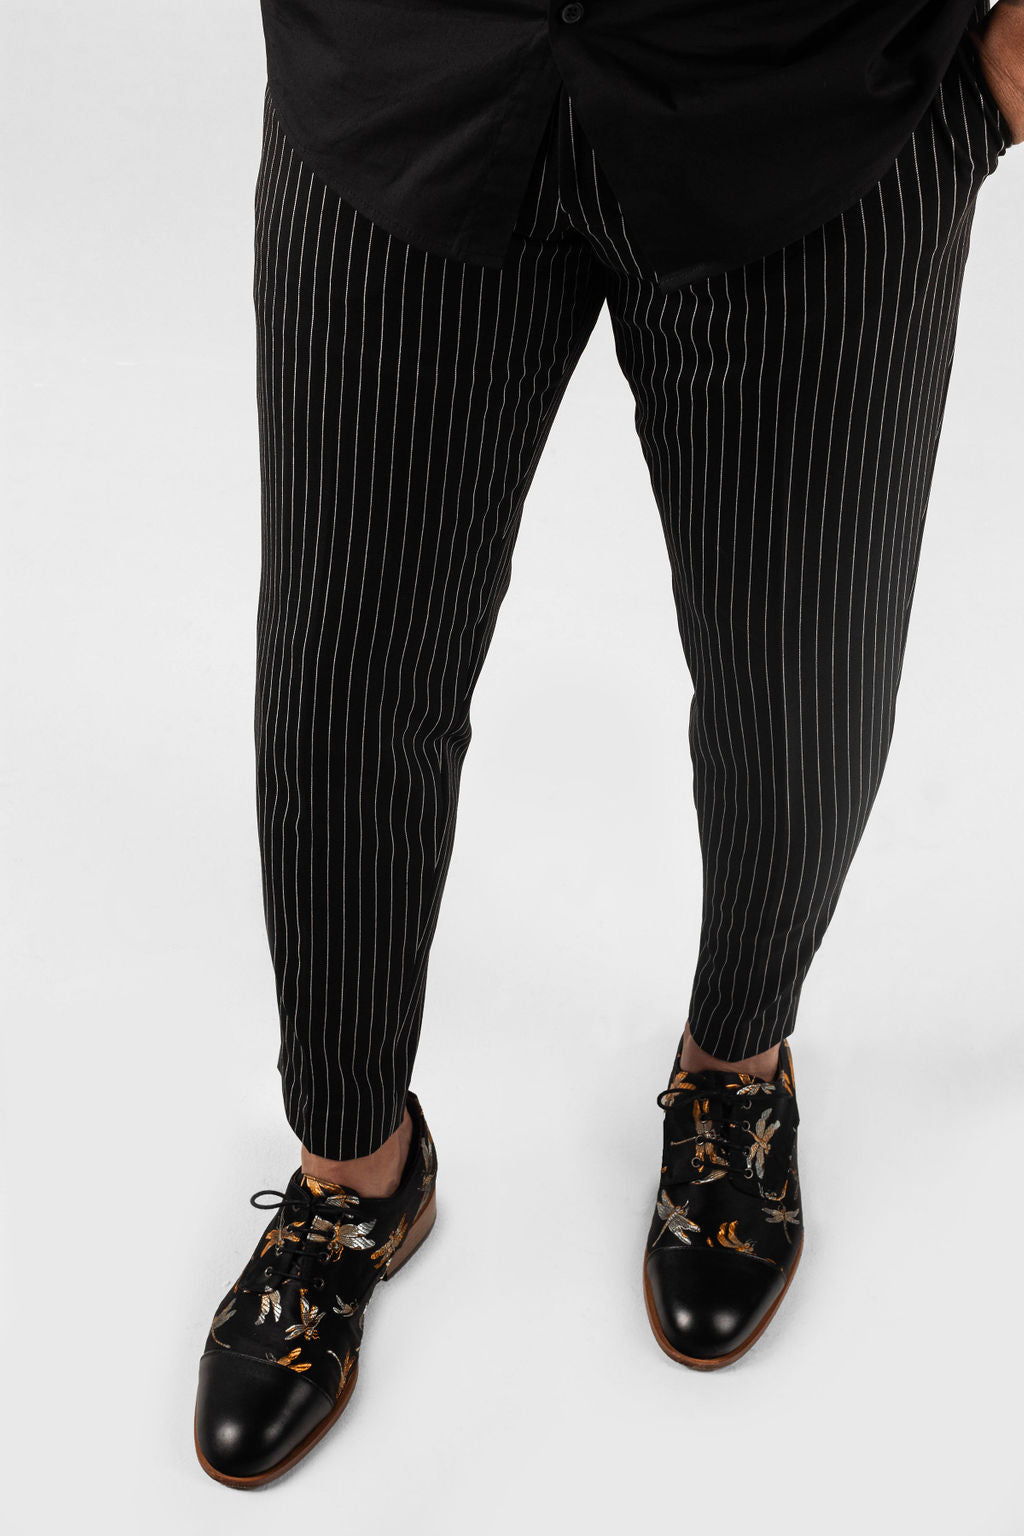 Black Pin Stripe Casual Trousers Work casual vibes in these trousers  Featuring a black pins  Trousers women Fashion Fashion outfits